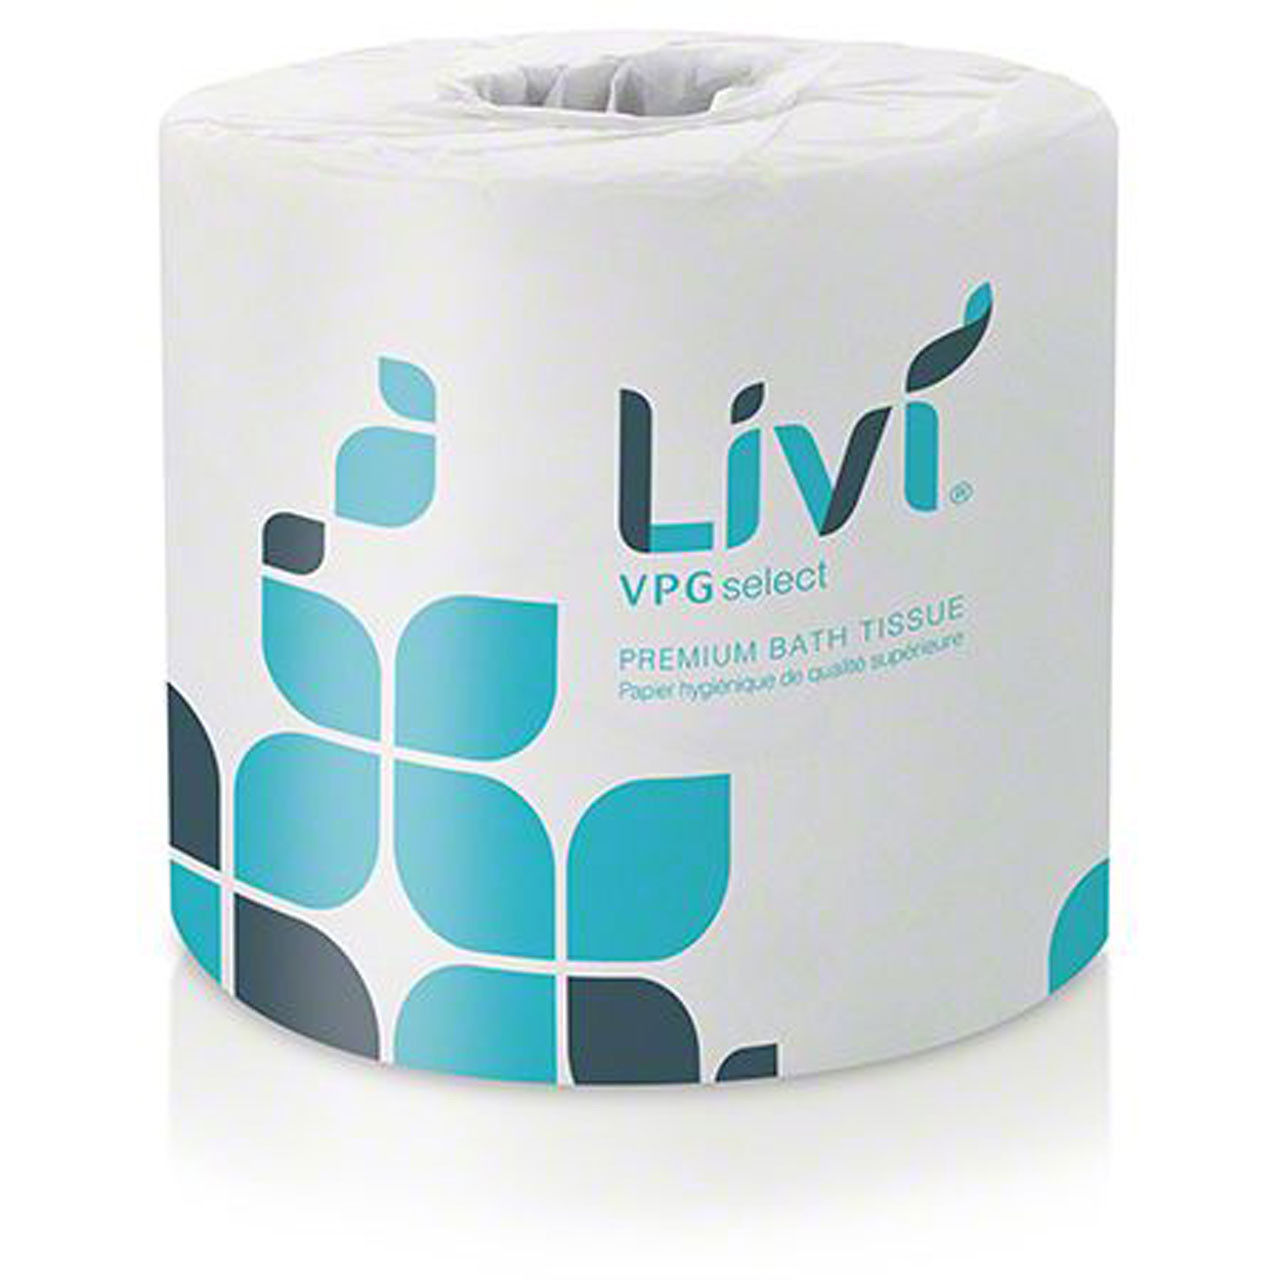 What is the material of the Solaris Paper Livi VPG Select Toilet Tissue 2/ply?